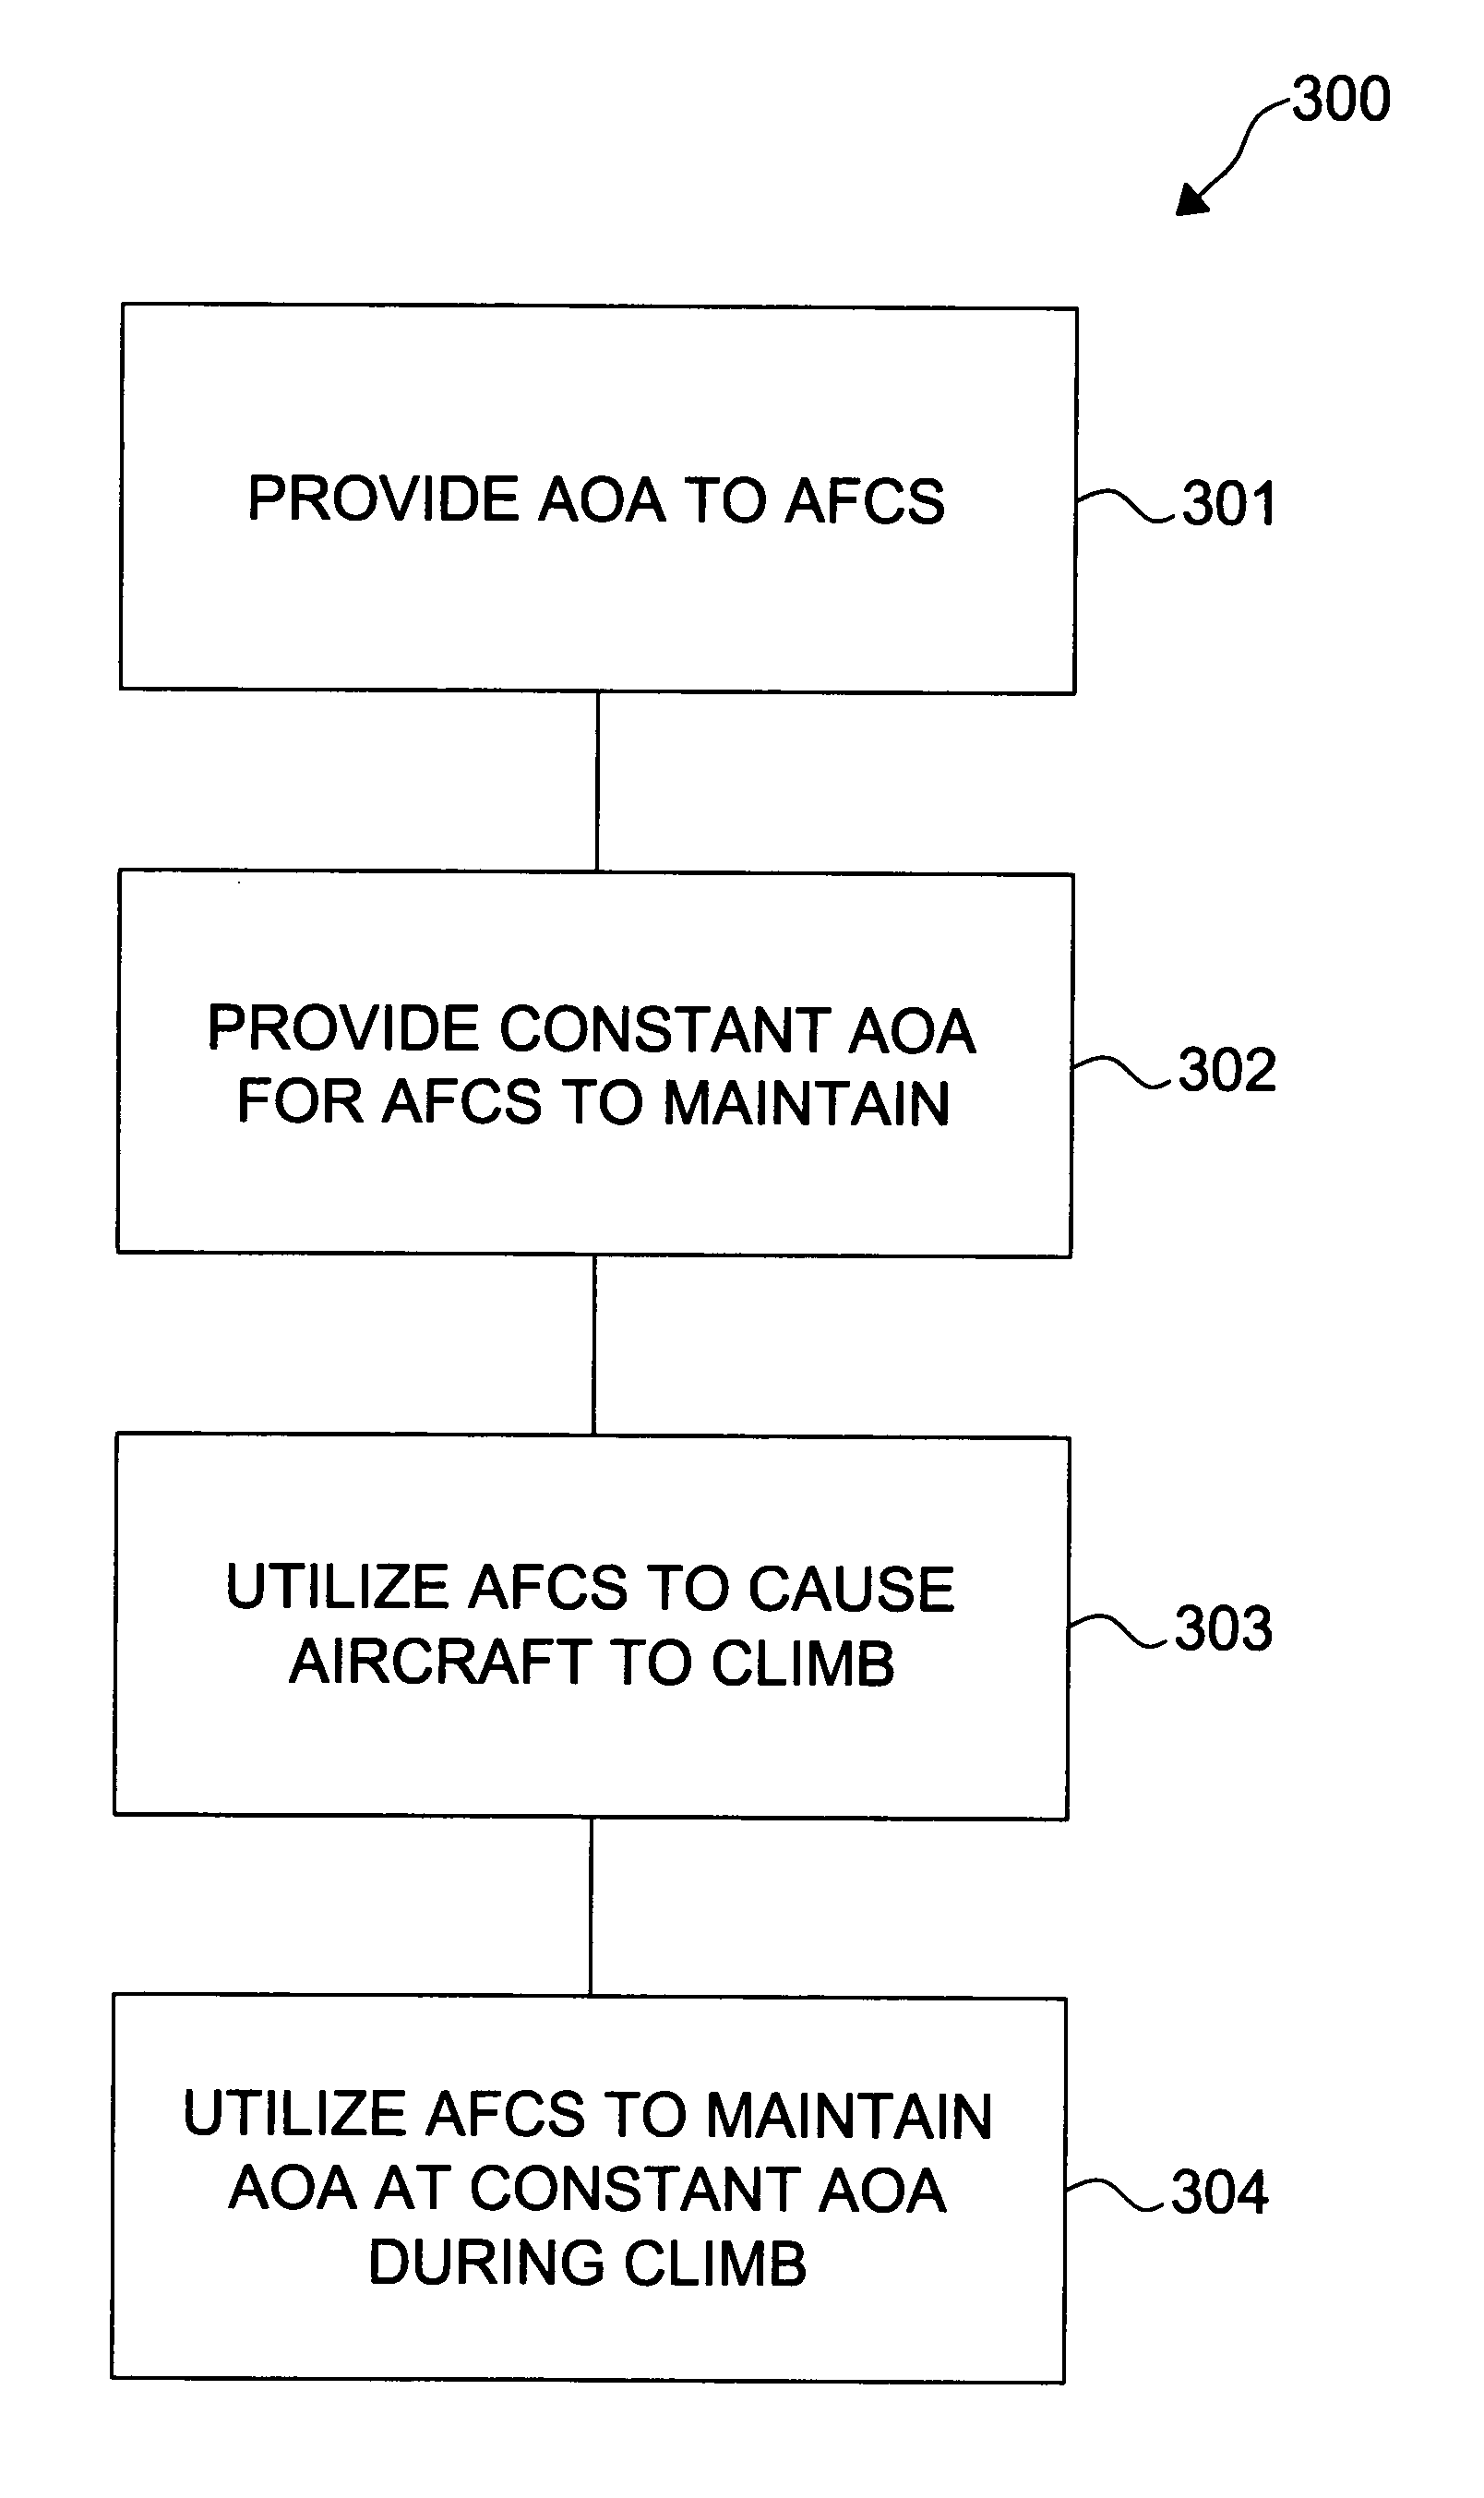 Angle of attack automated flight control system vertical control function